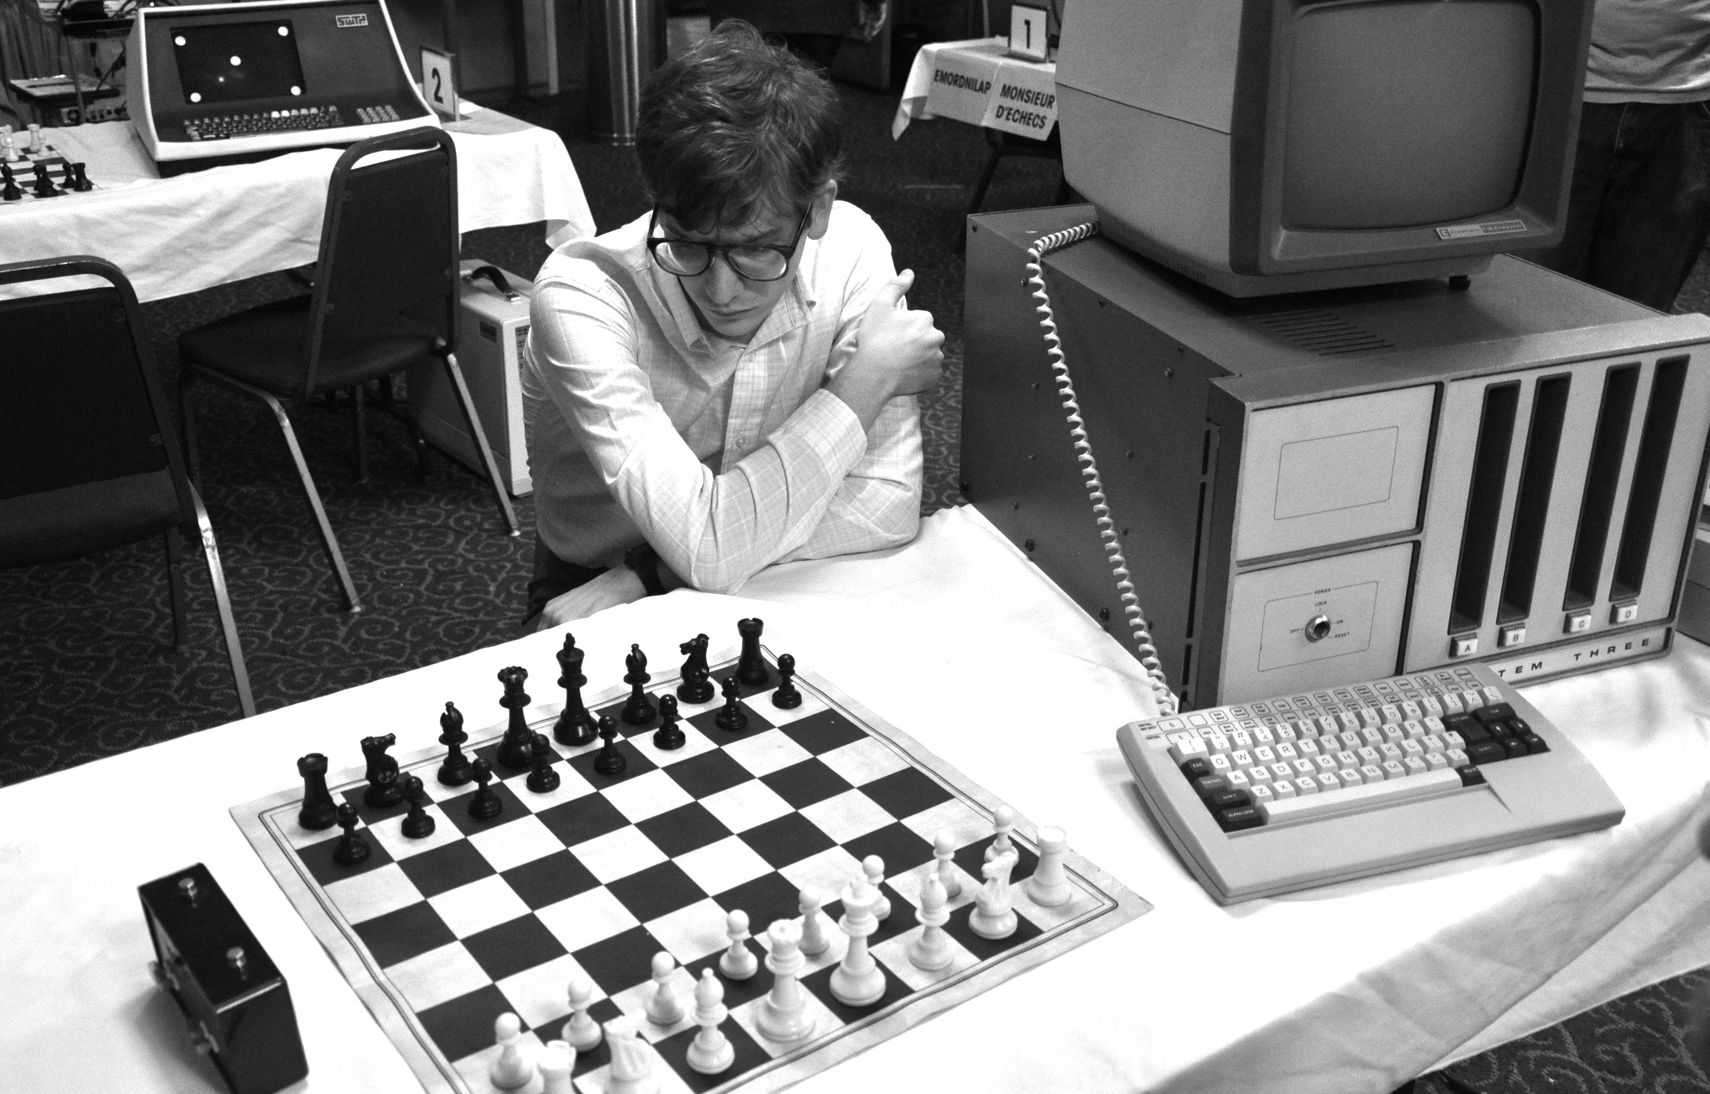 Patrick Riester as Peter Bishton in Computer Chess